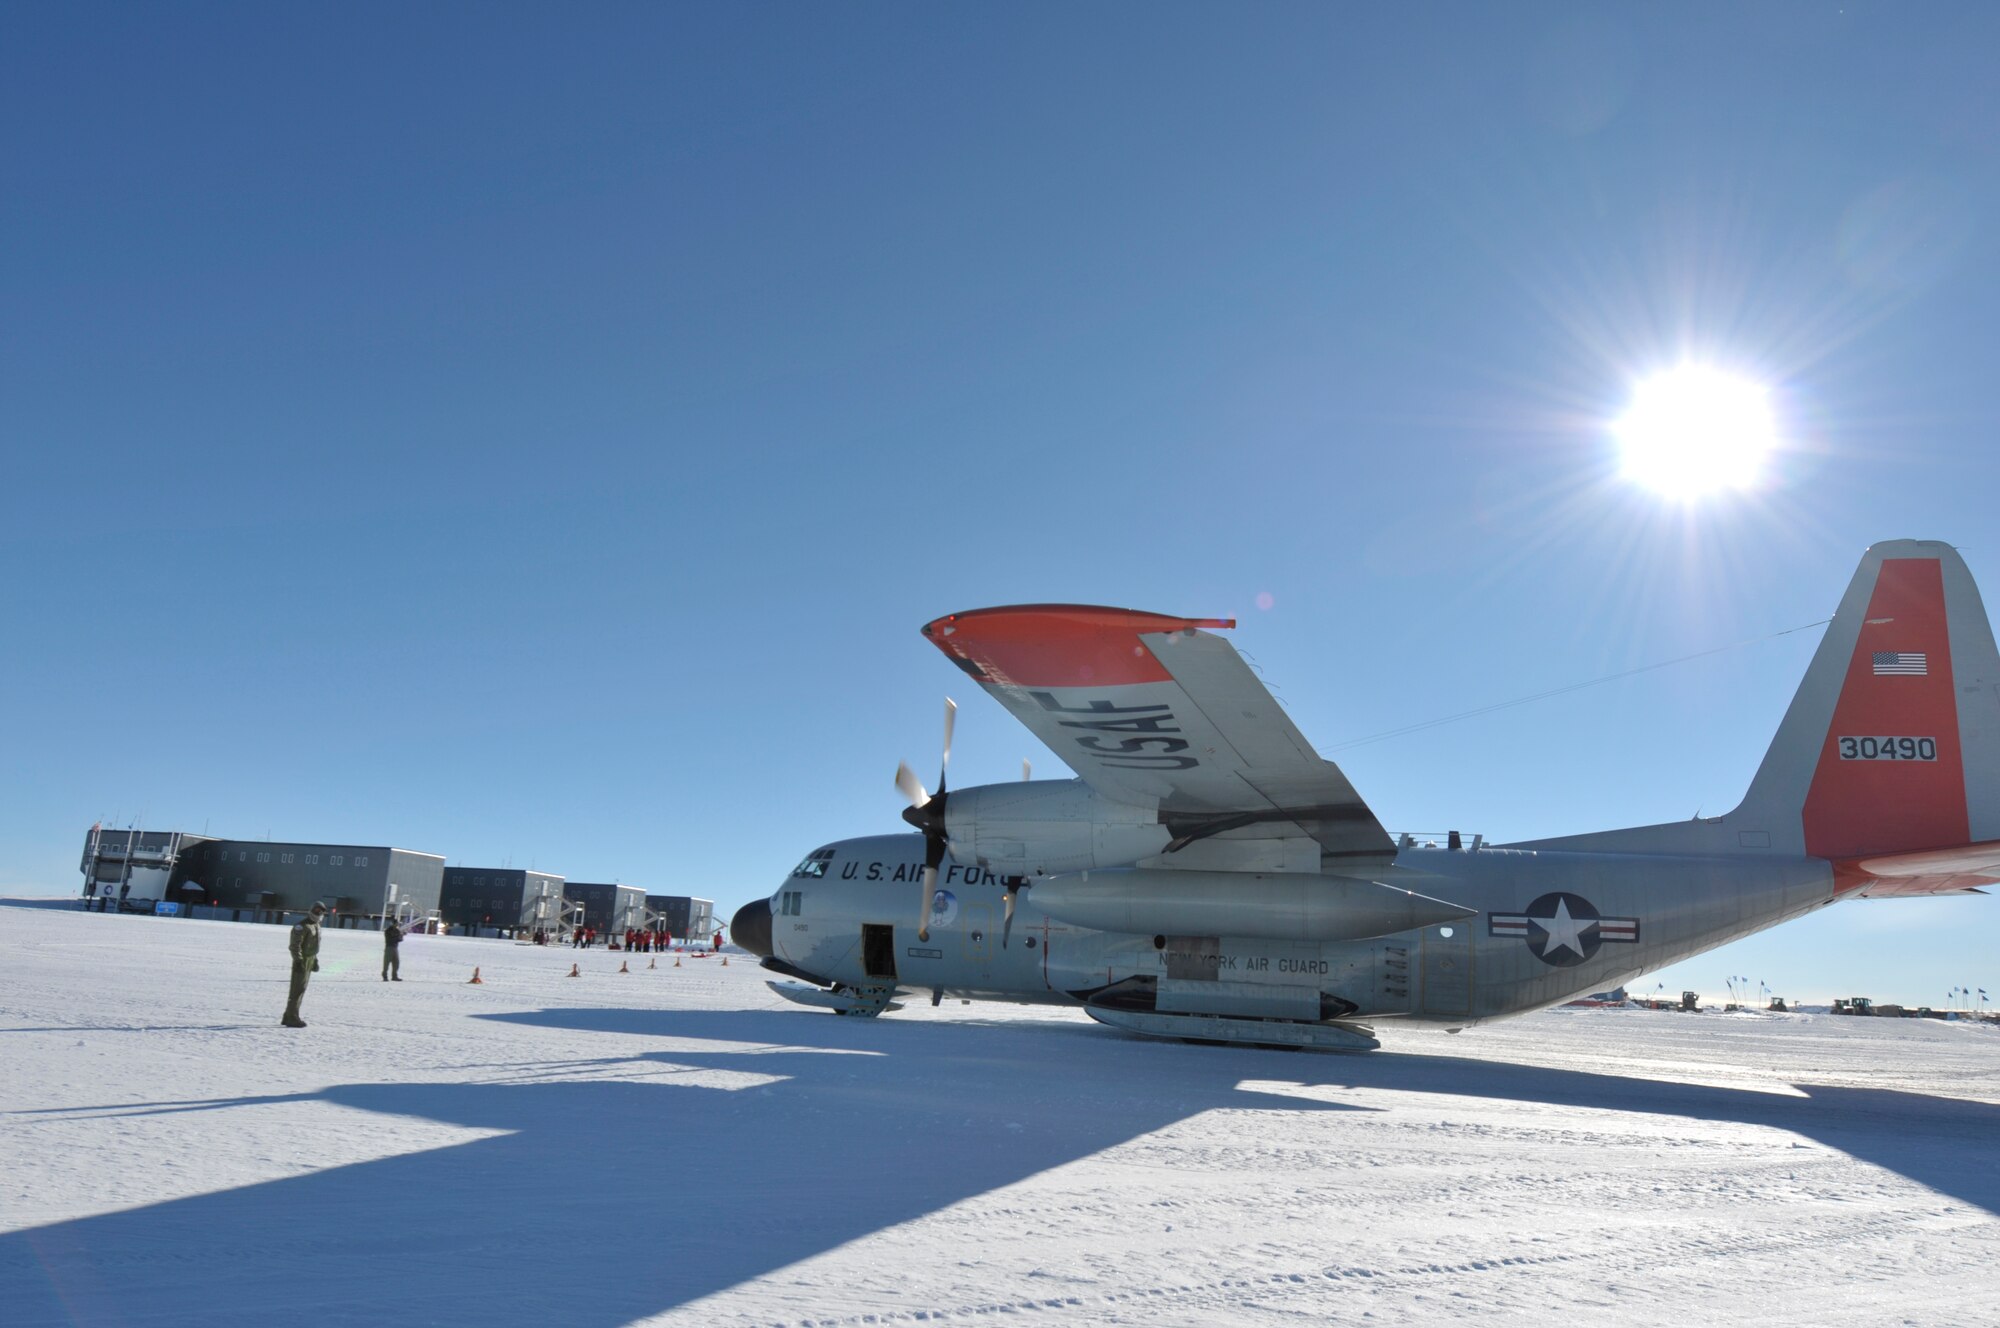 A LC-130 Skibird lands at the South Pole Station, Antarctica December 15th 2012, bring supplies, passengers and fuel to the station. (USAF Photo by SrA Ben German/Released)